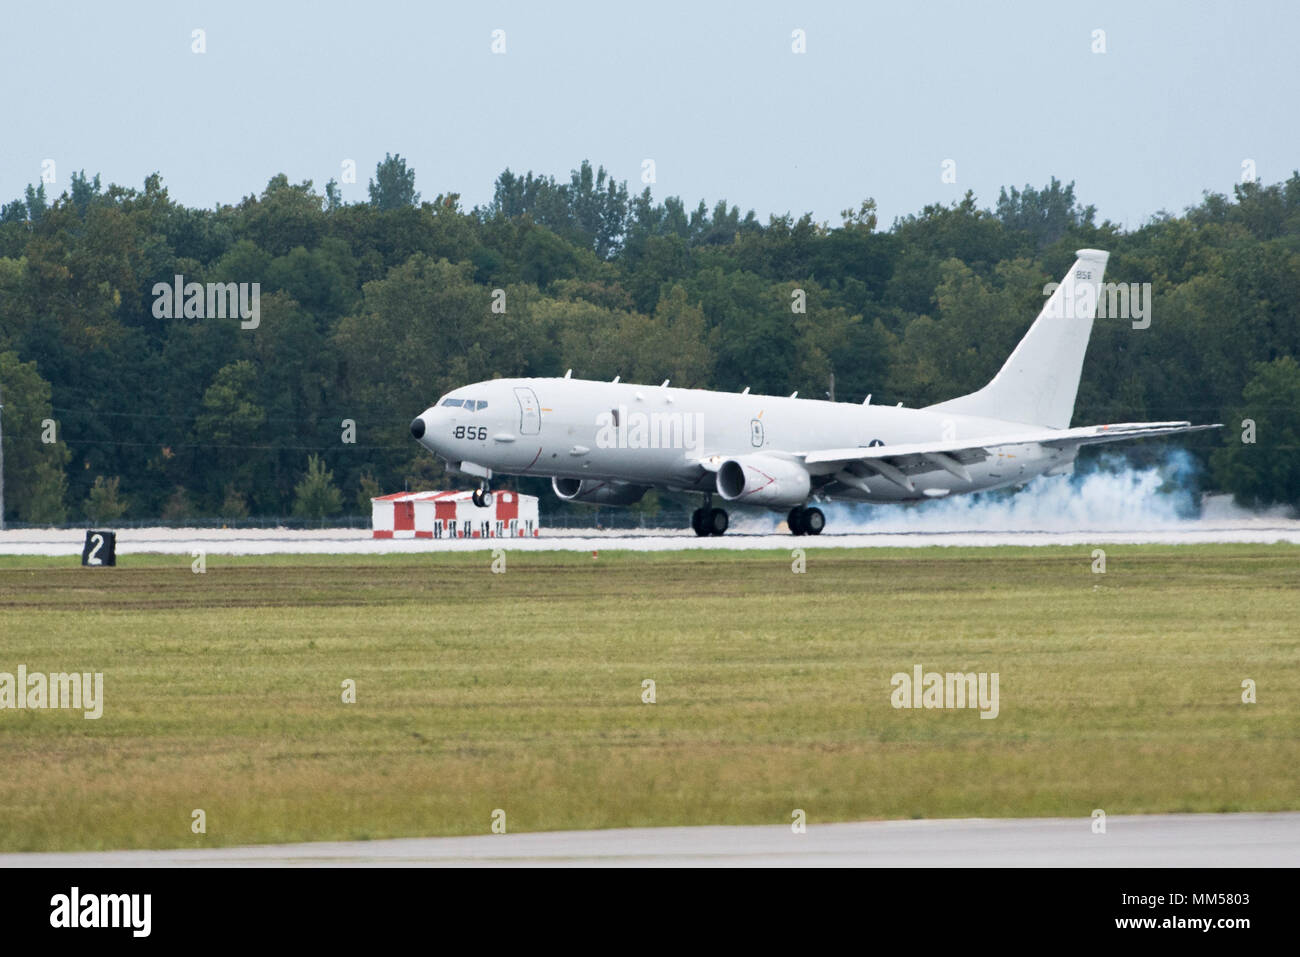 A U S Navy P 8 Aircraft From Jacksonville Fla Lands At